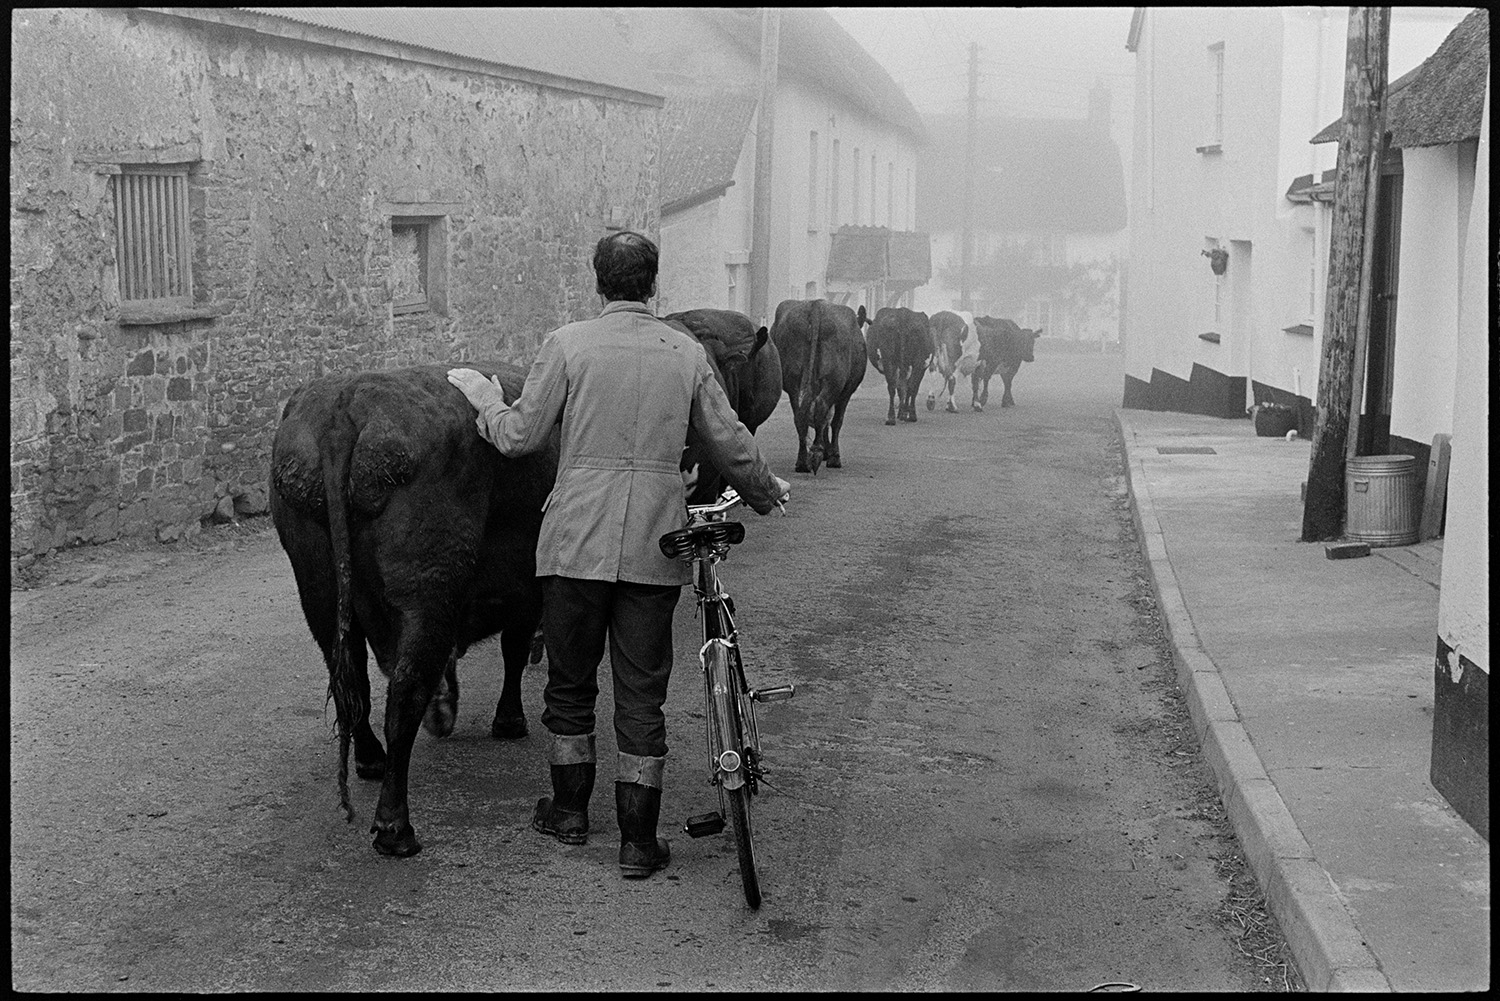 Cows going through village farmer with bicycle, mist. 
[Walter Newcombe herding cows down East Street in Sheepwash through mist. He is also pushing a bicycle.]